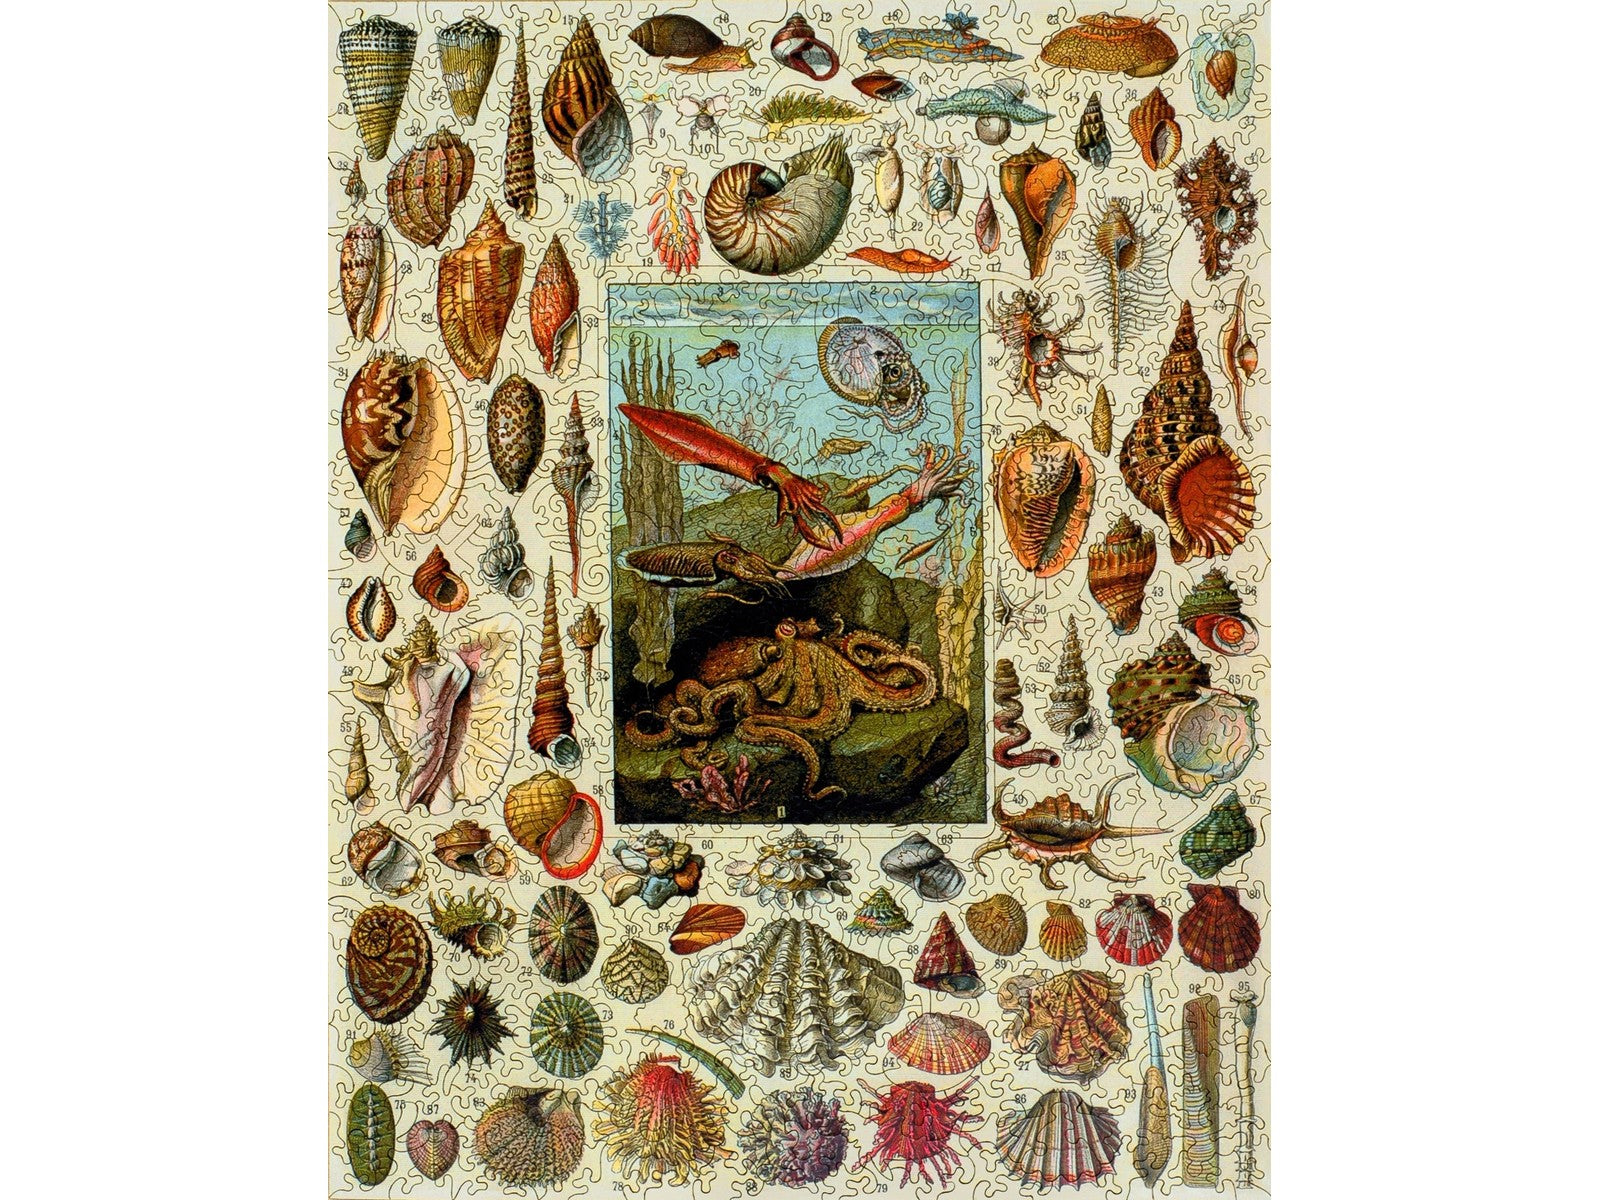 The front of the puzzle, Varieties of Molluscs, which shows a vintage print of different kinds of seashells.